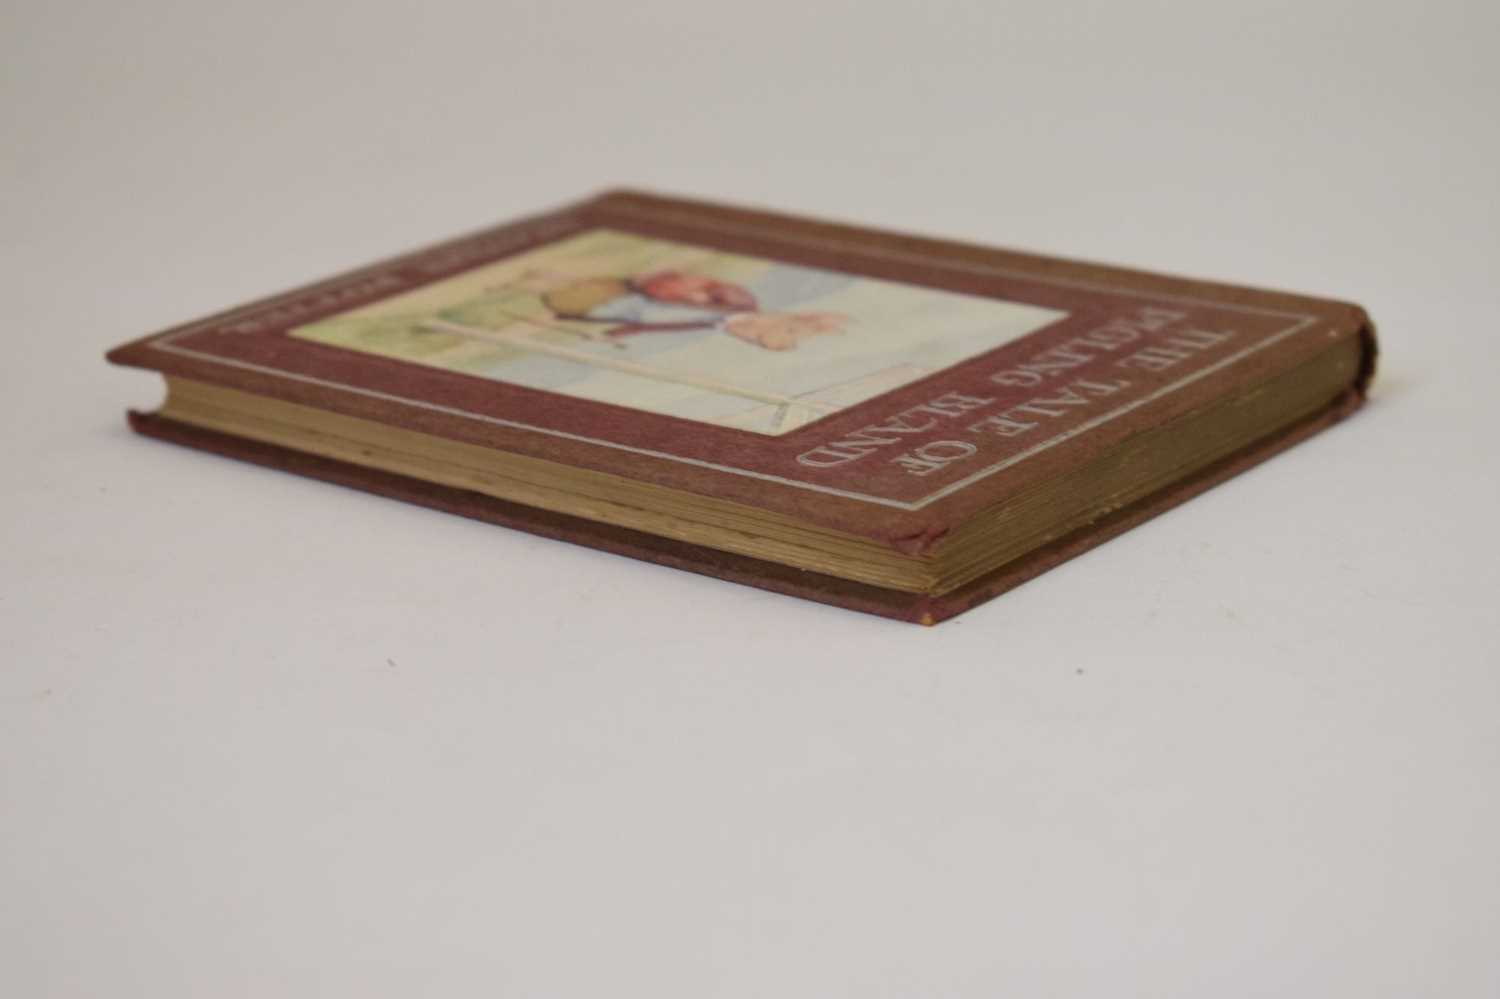 Potter, Beatrix - 'The Tale of Pigling Bland' - First edition 1913 - Image 4 of 19